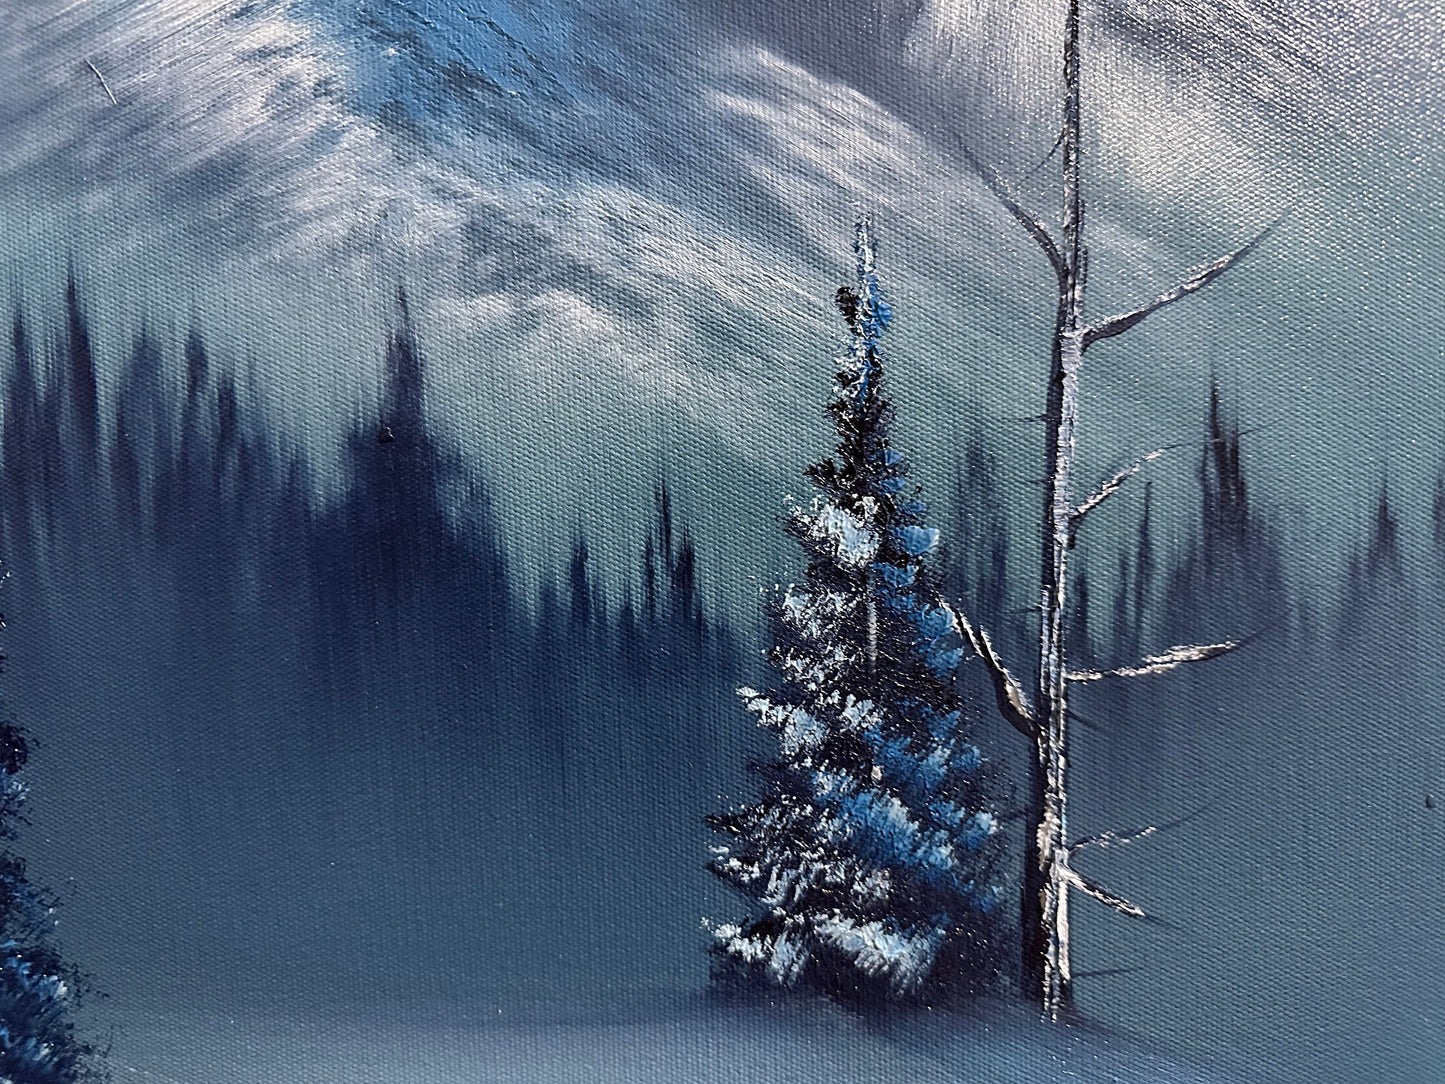 Painting 937 - 18x24" Liquitex Recycled Canvas - Cold Blue Winter painted Live on TikTok on 9/9/23 by PaintWithJosh